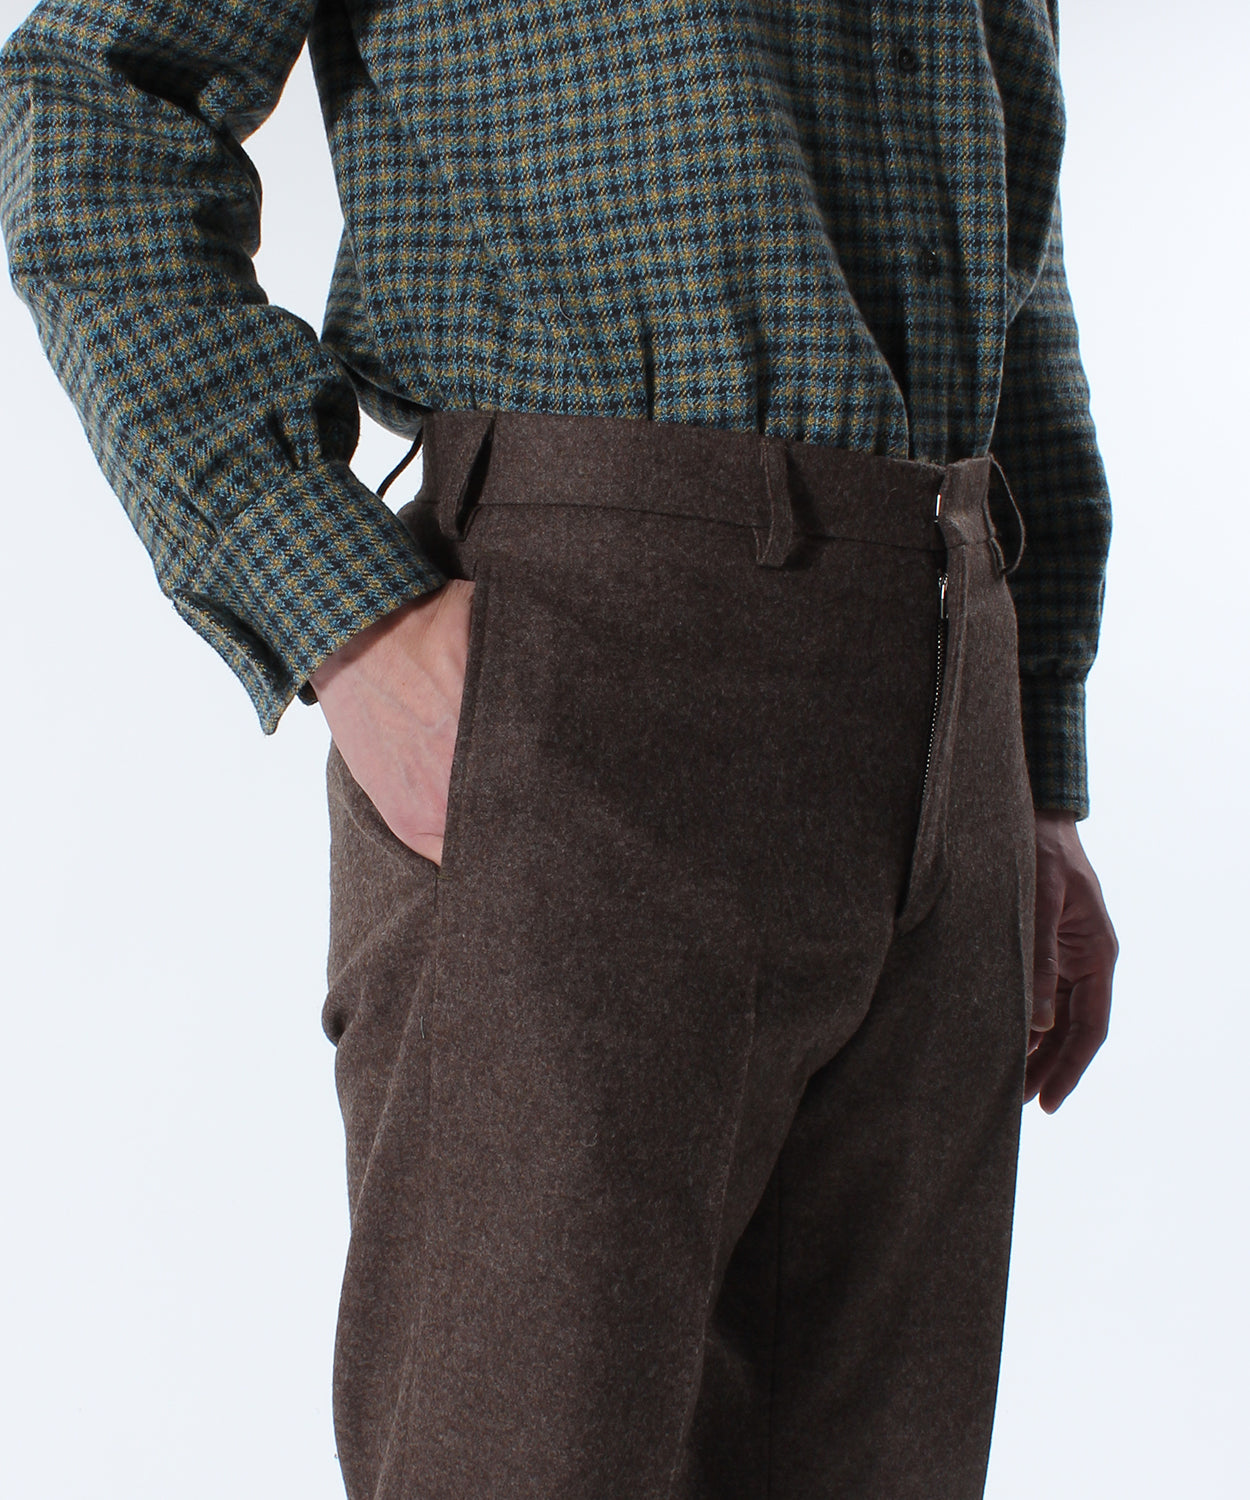 Men's Wool Pants - Soft & Strong | Zed By